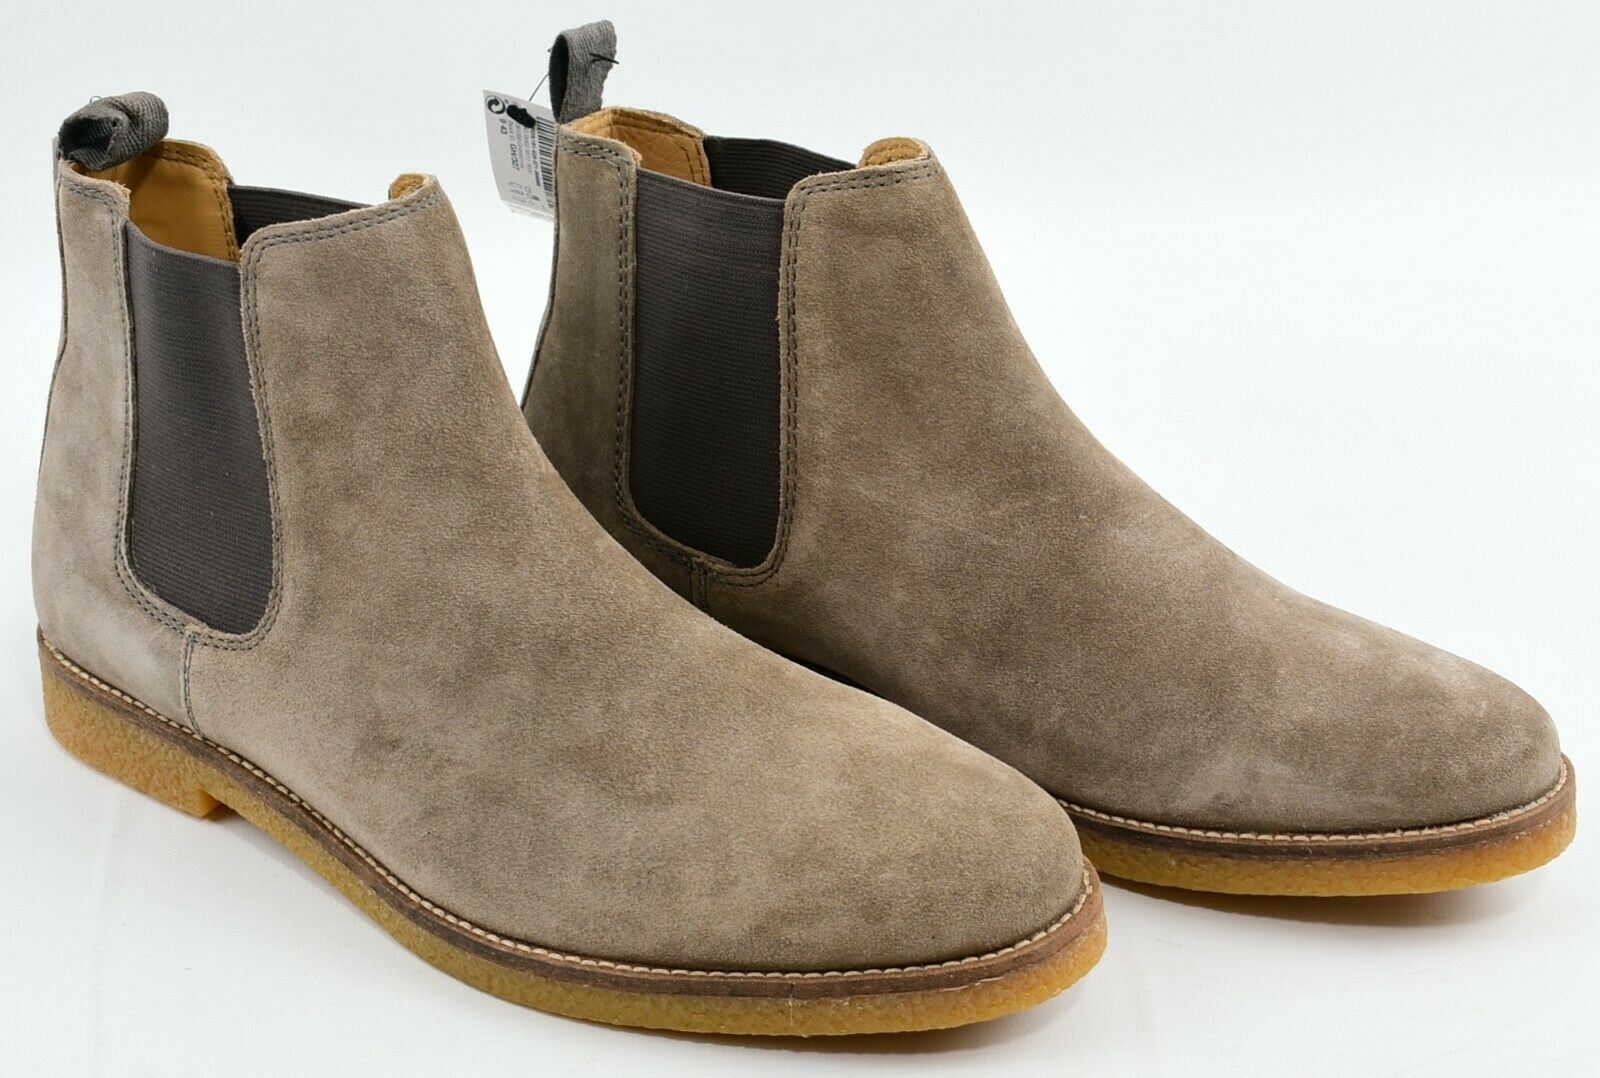 NEXT Men's Suede Leather Chelsea Boots, Stone, size UK 9